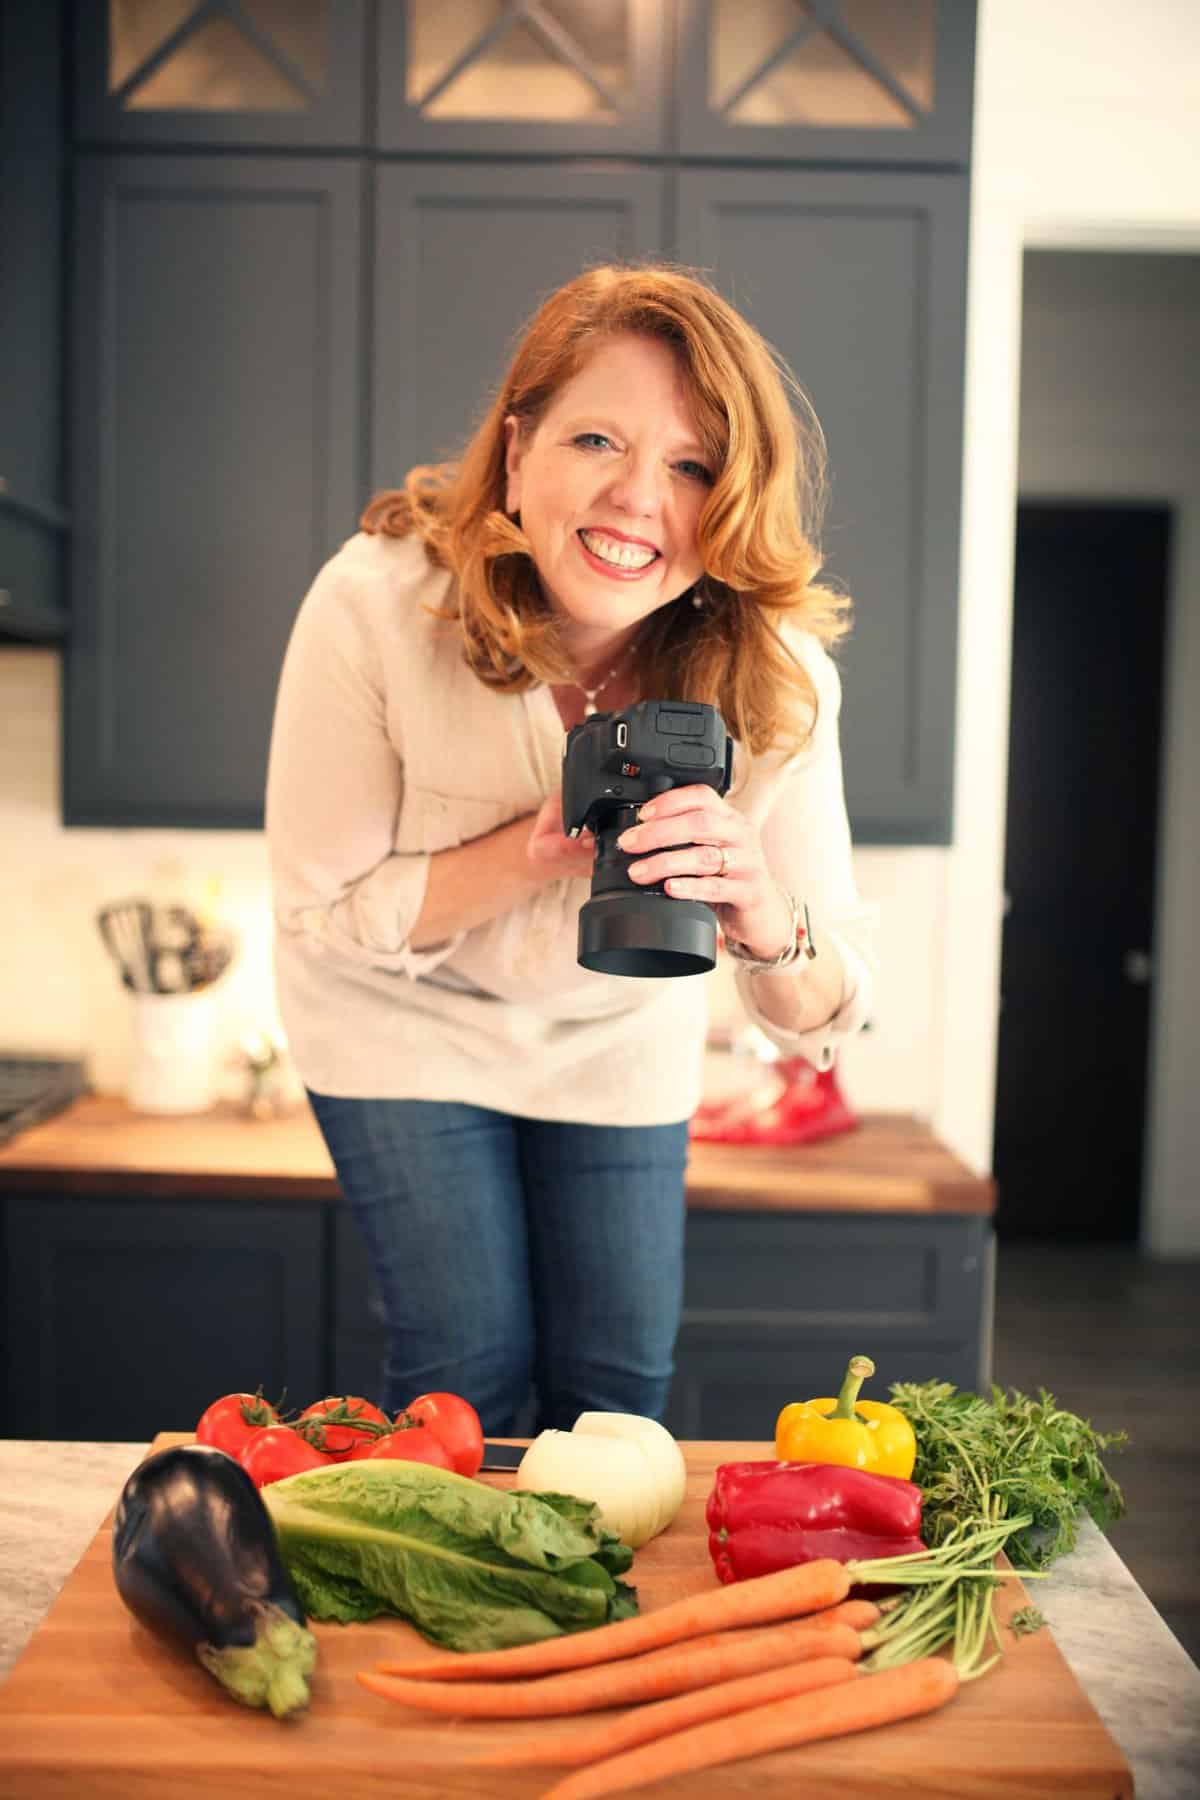 joanie smiling with camera in hand standing above vegetables.